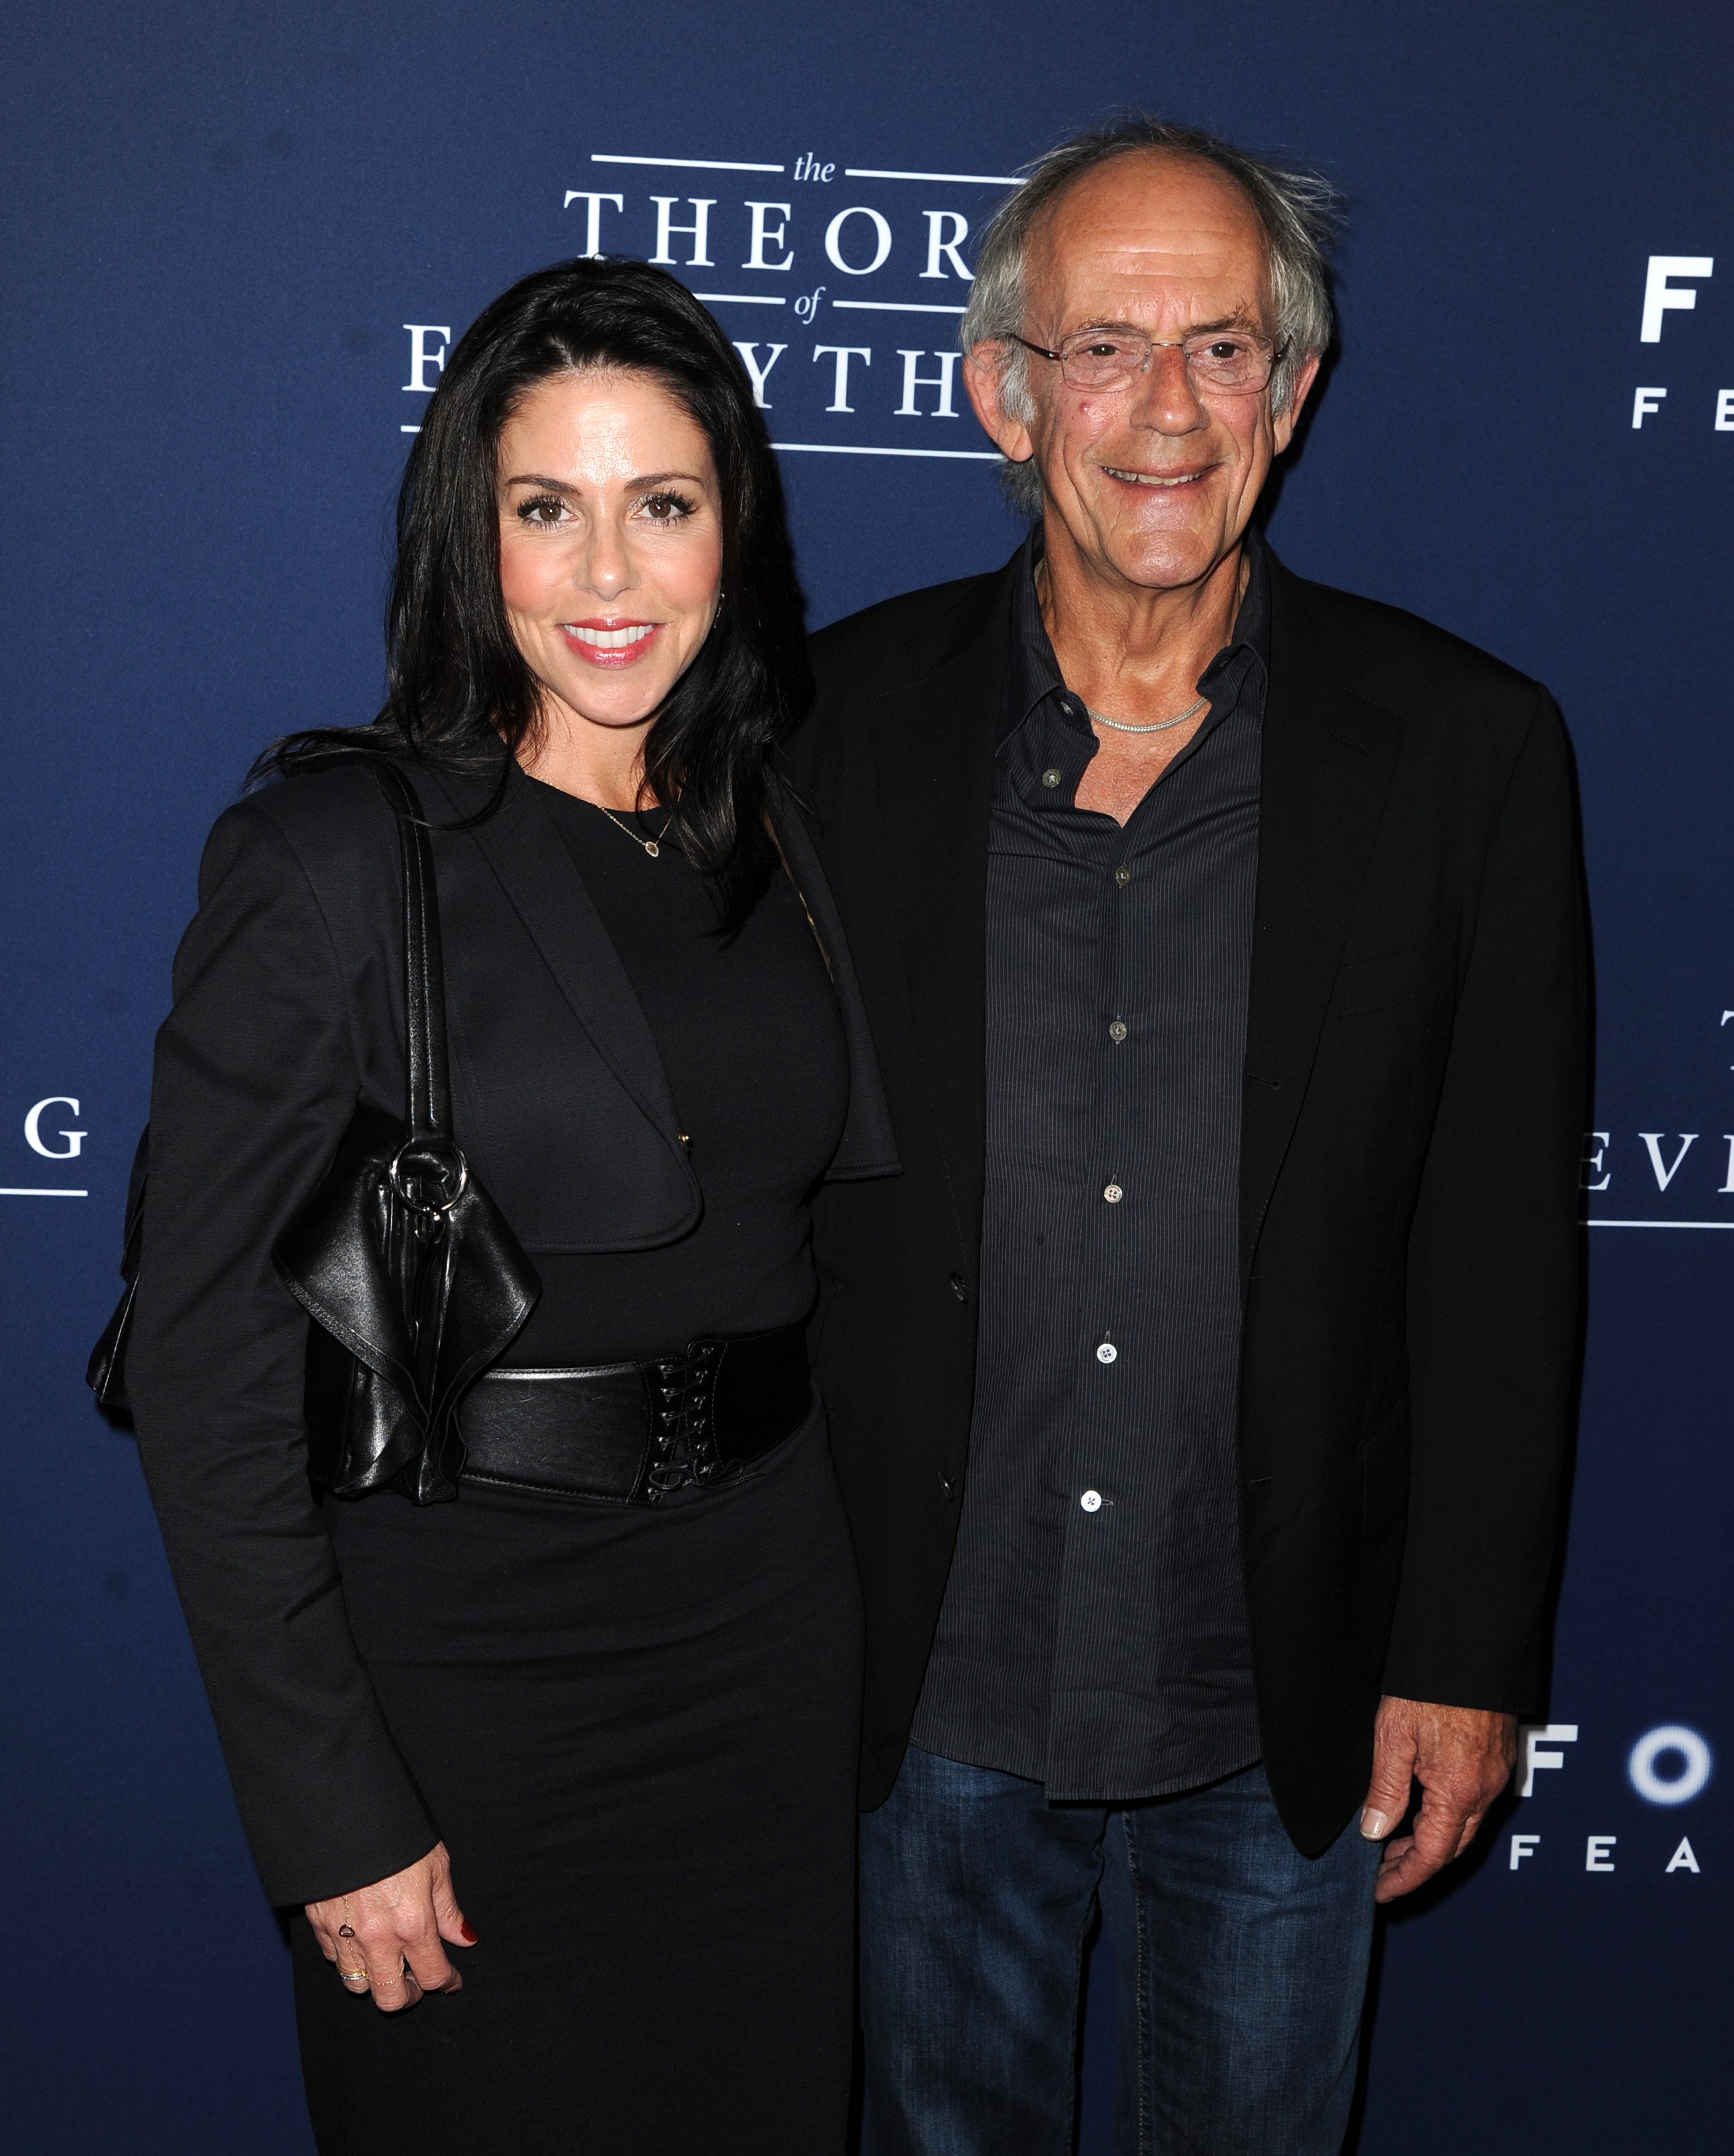 Christopher Lloyd and Lisa Loiacono at the "The Theory Of Everything" premiere hosted at AMPAS Samuel Goldwyn Theater, Beverly Hills, CA, on  October 28, 2014. | Source: Getty Images